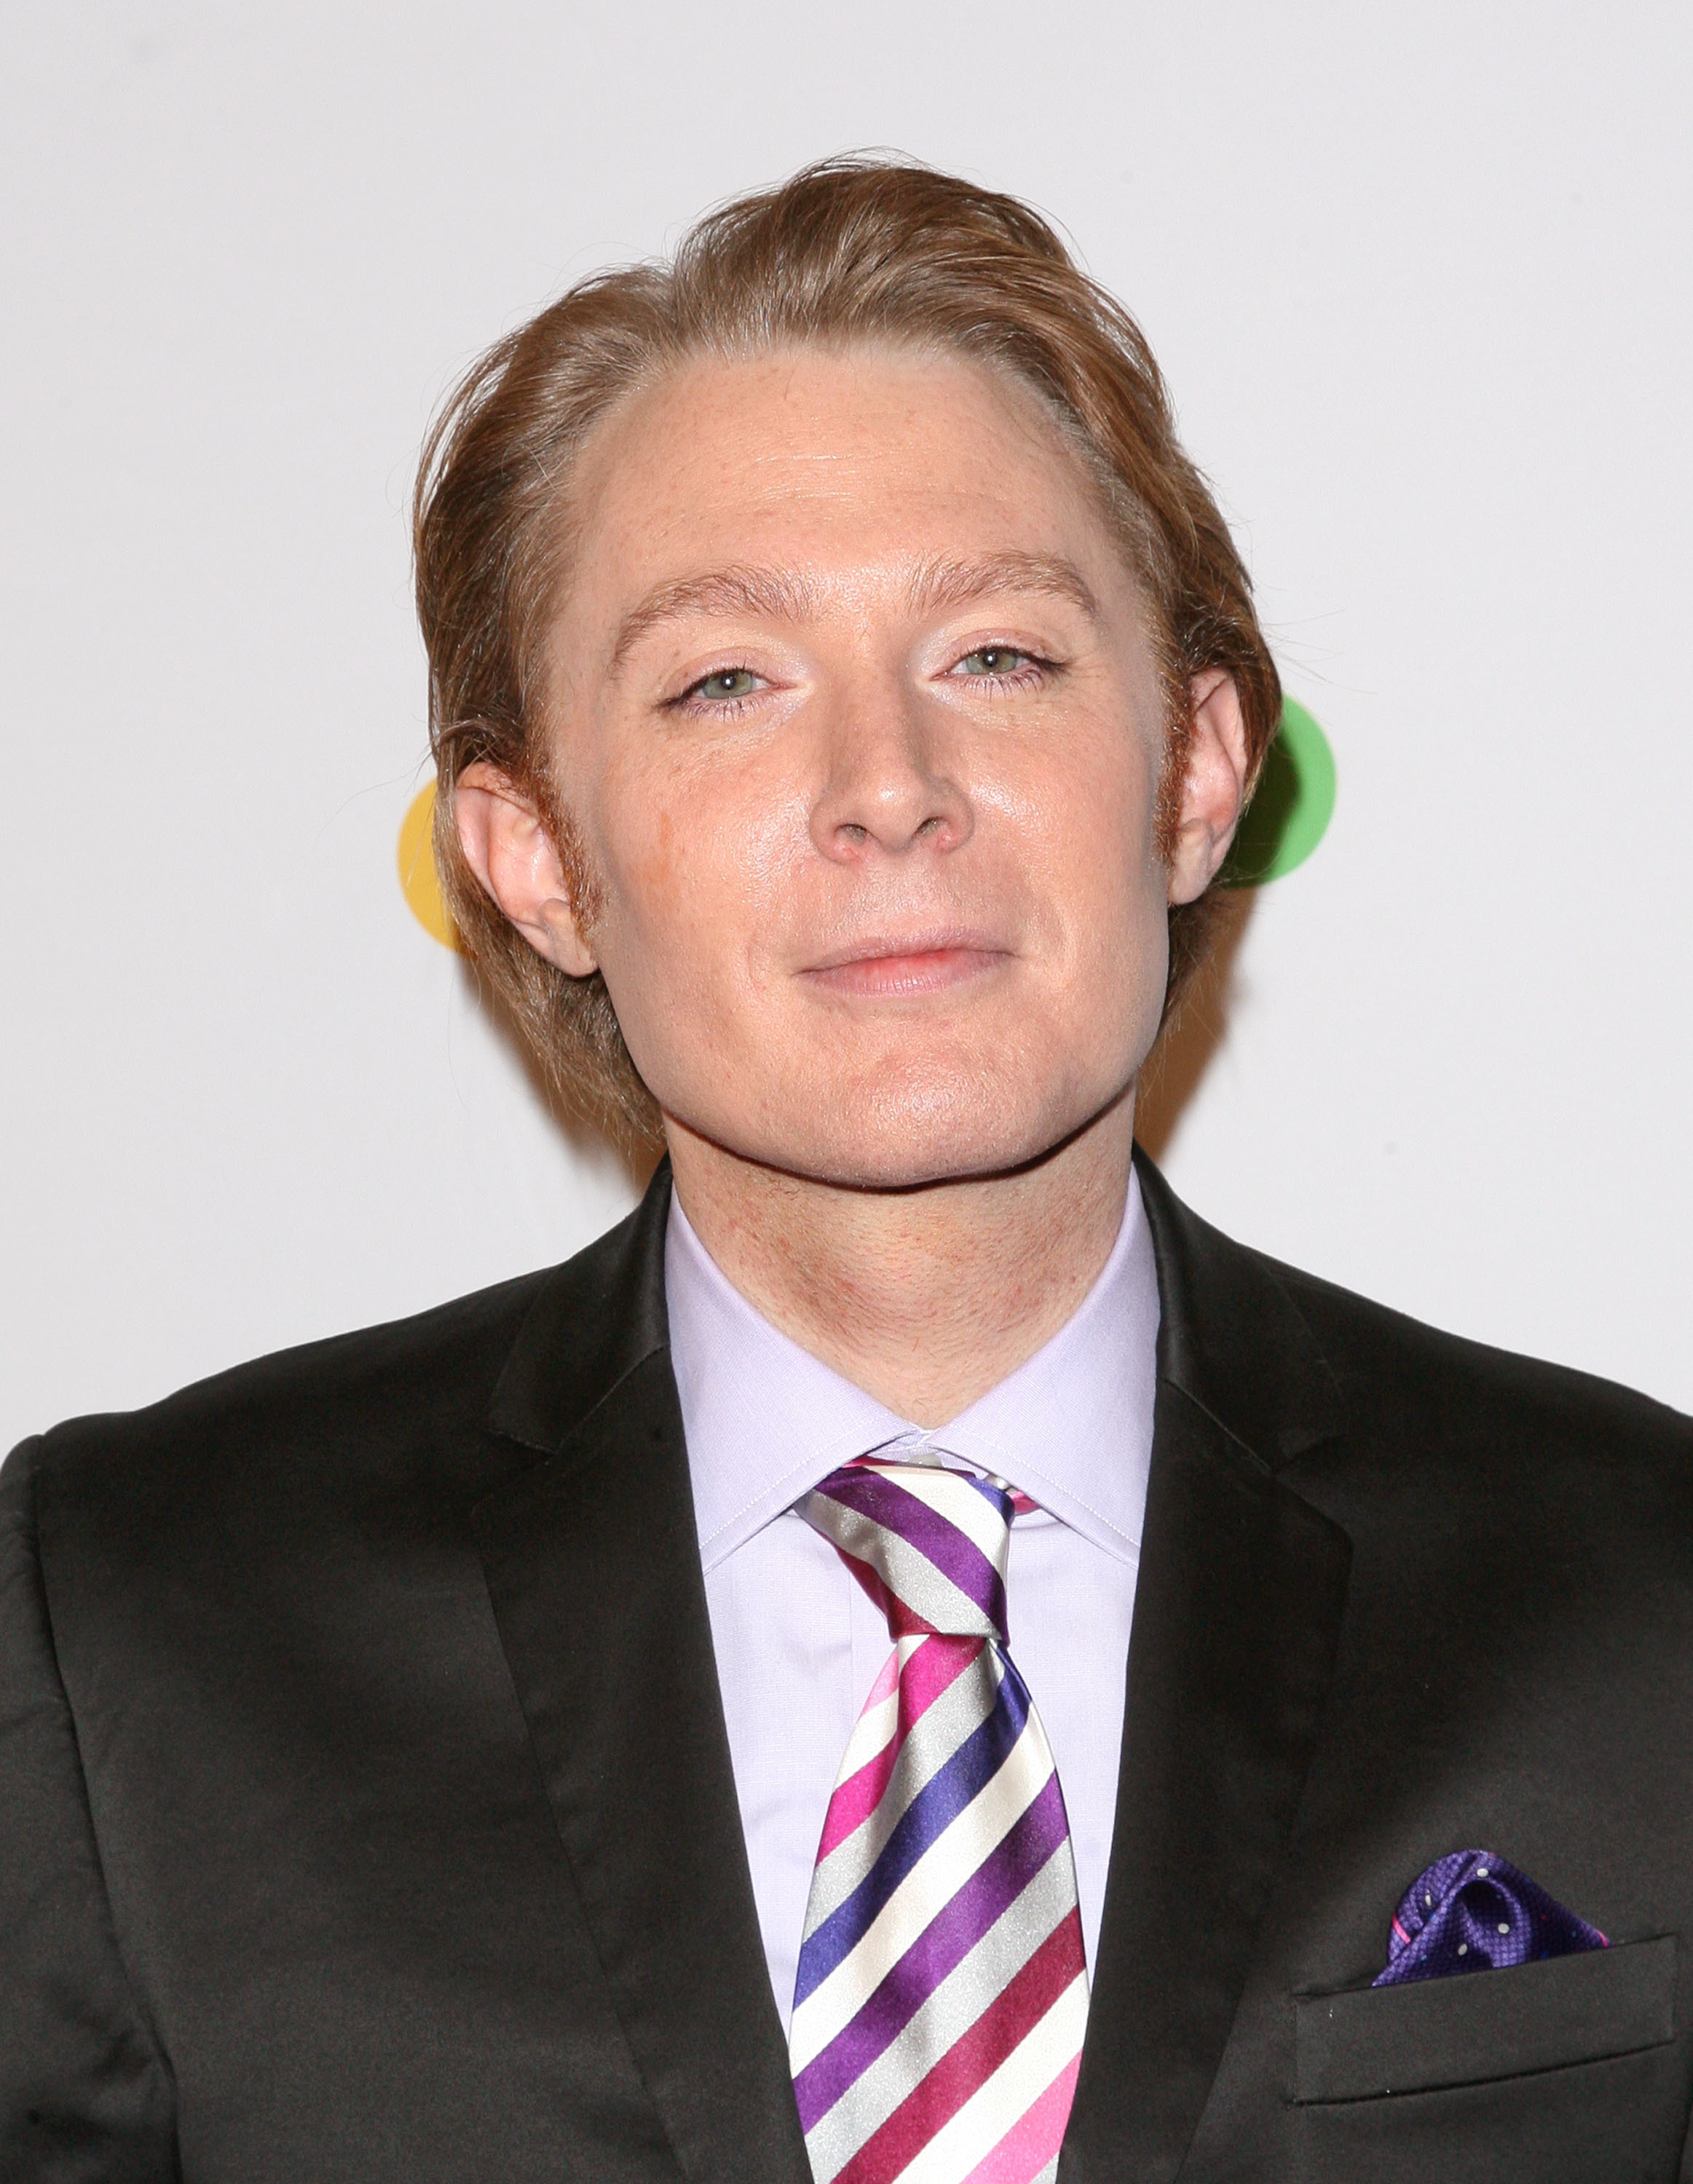 <p>"I had operative surgery on my jaw for a TMJ thing and I had them suck the fat out of my chin while they were in there," Clay Aiken revealed in 2012. He showed off his new look during the live finale of "The Celebrity Apprentice" in New York City that same year.</p>